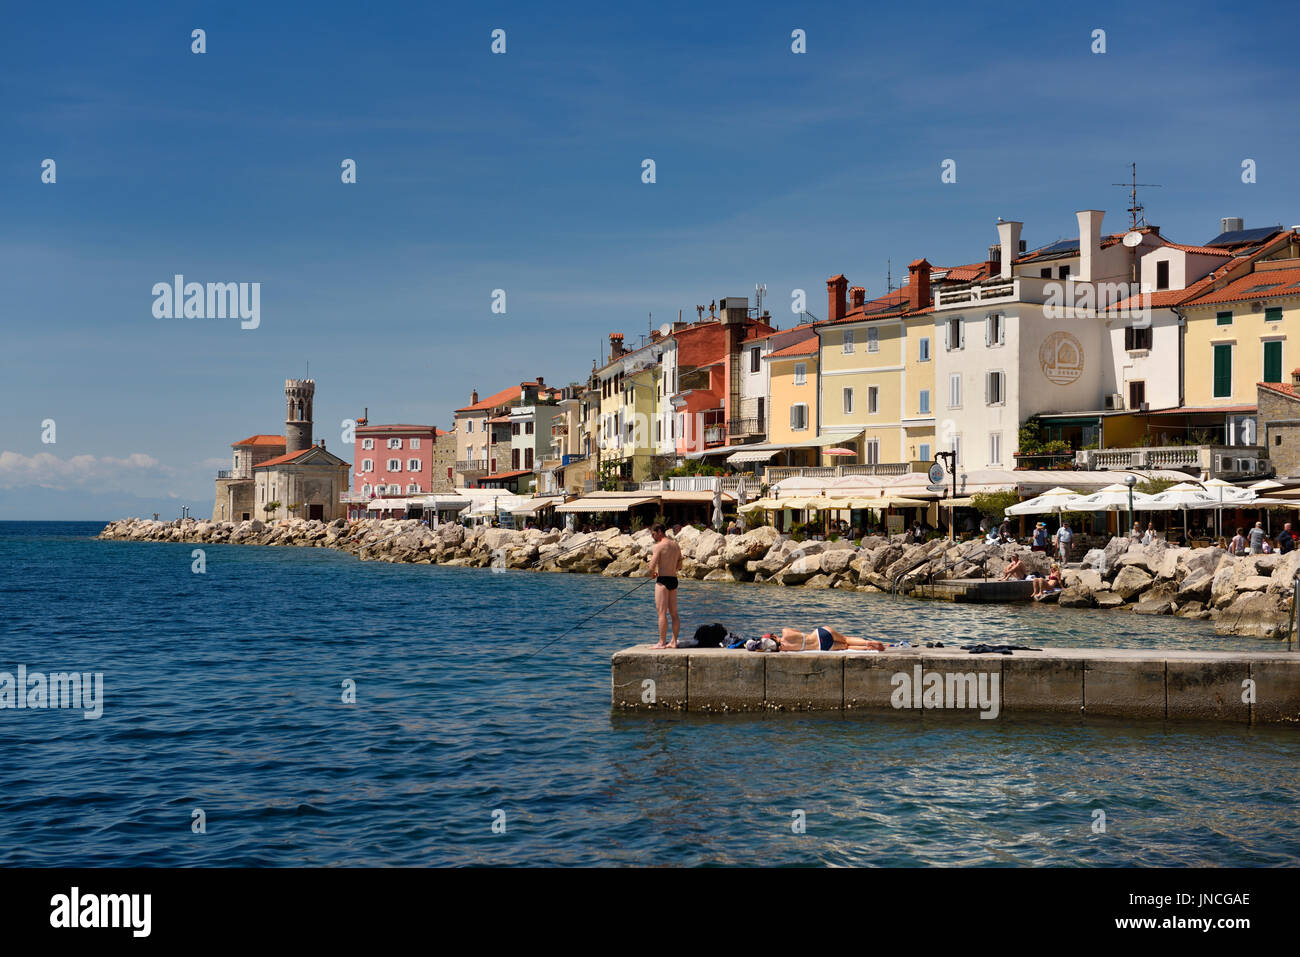 Young couple fishing reading sunbathing on dock at Piran Slovenia on the Adriatic Sea coast with Church of St Clement at Punta Lighthouse Stock Photo